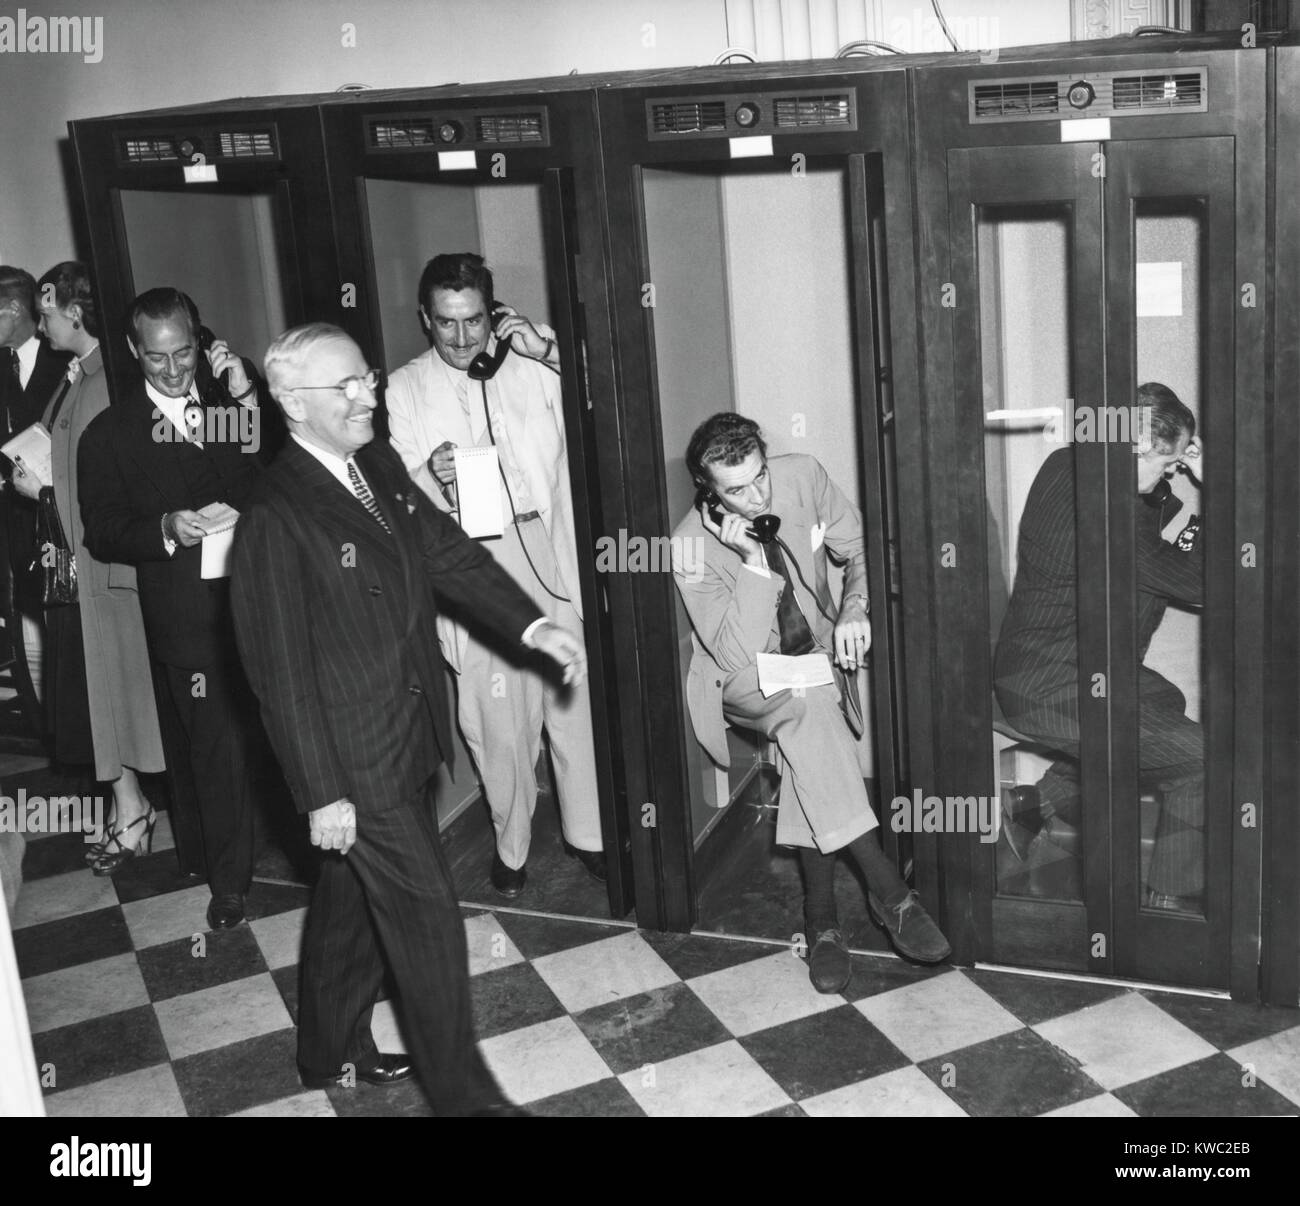 President Harry Truman walks past reporters in the telephone booths the Old State Department Building. They are reporting back to their headquarters after Truman's press conference, April 27, 1950. It was the first conference to require newsmen to remain seated and arise and identify themselves when asking questions. (BSLOC_2015_2_238) Stock Photo